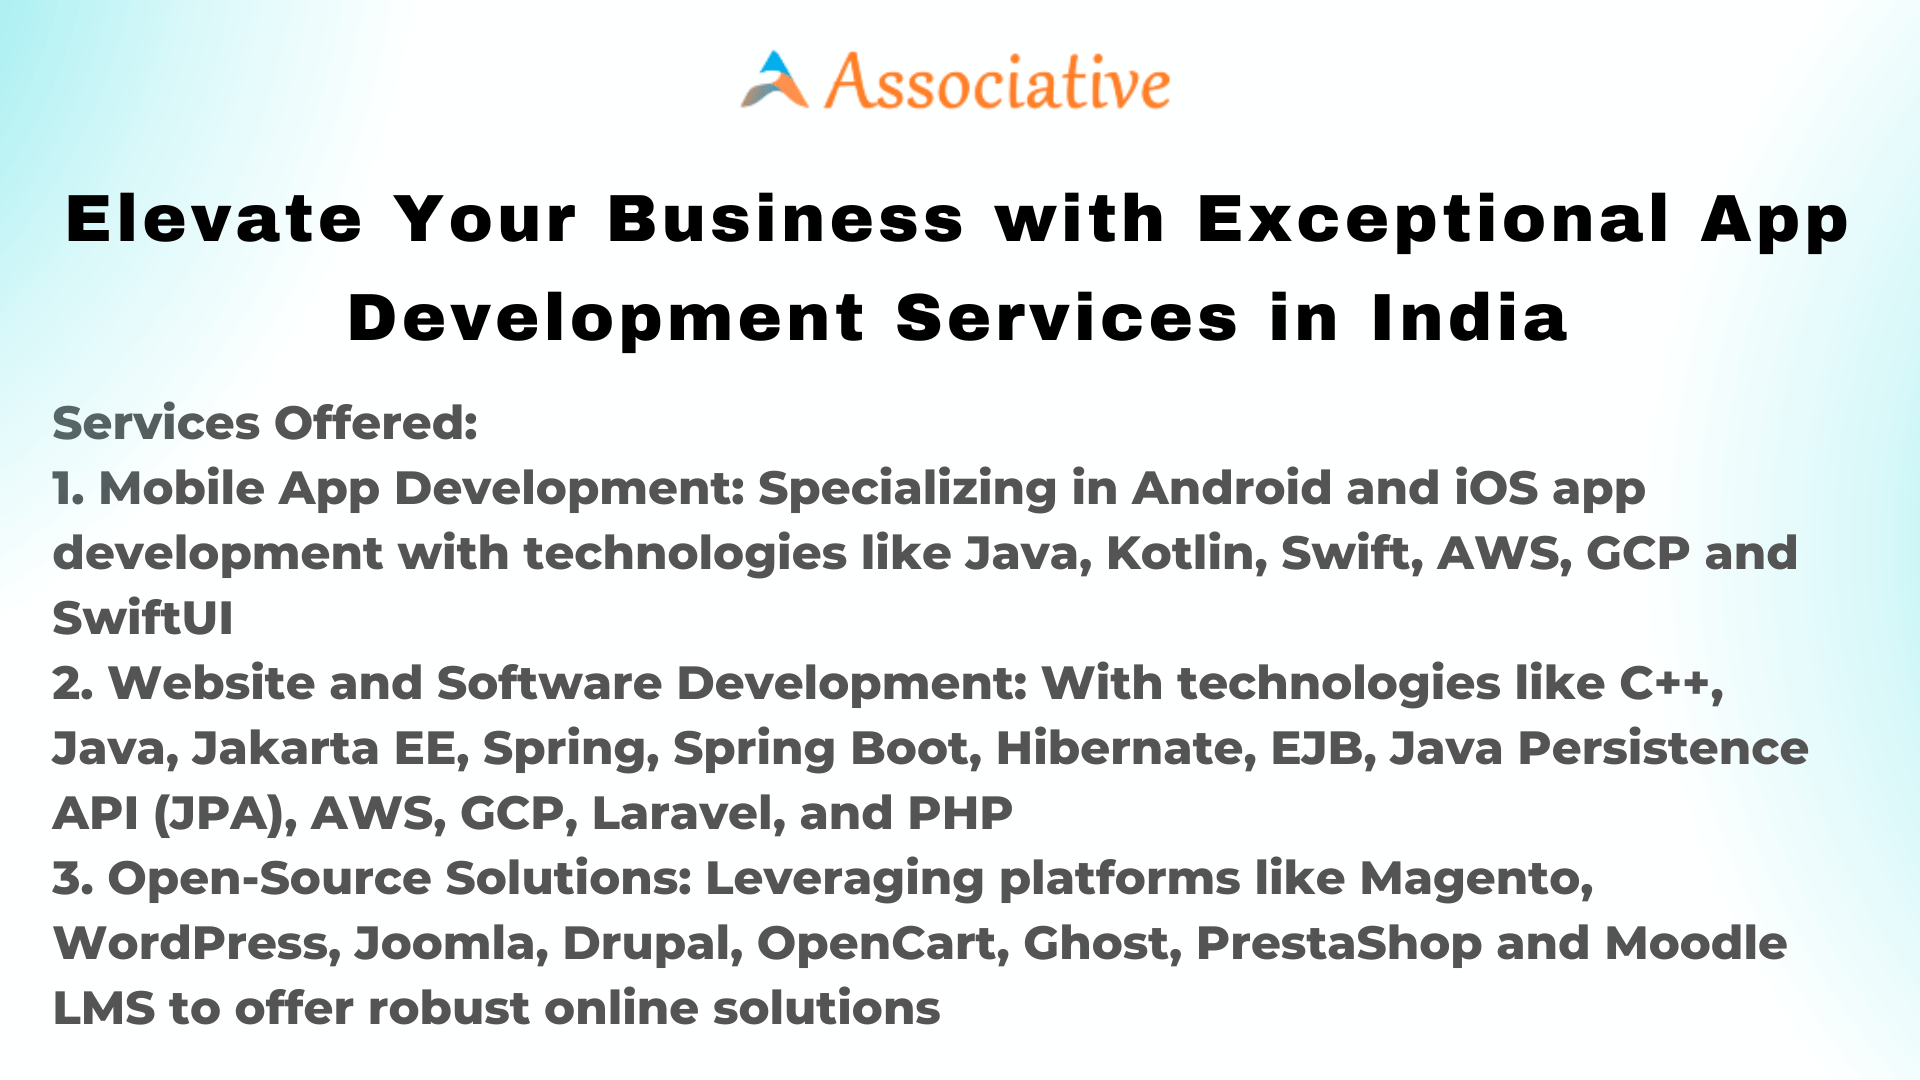 Elevate Your Business with Exceptional App Development Services in India